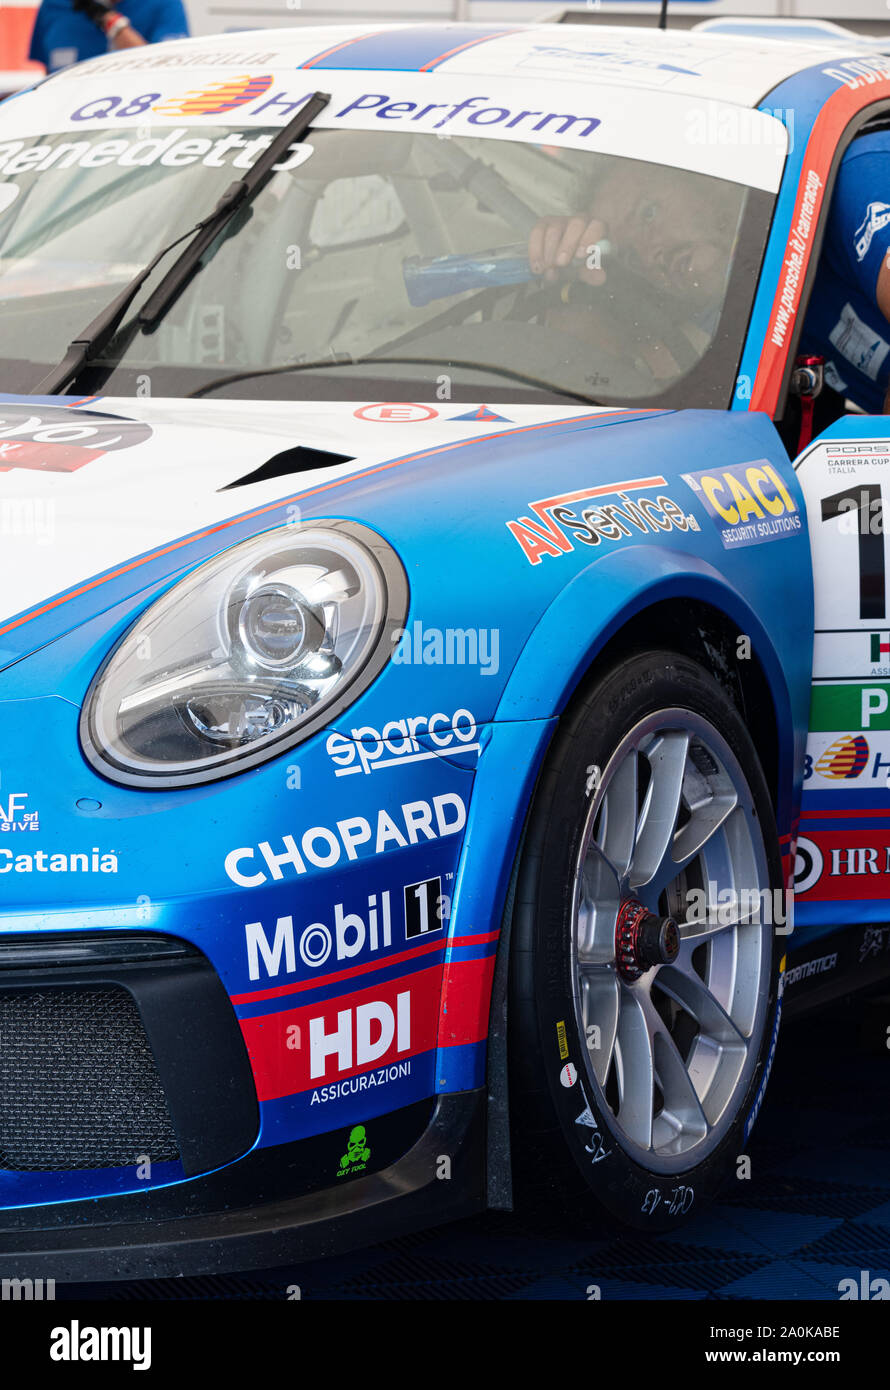 Vallelunga, Italy september 14 2019, Racing Porsche Carrera car blue color side view in paddock mechanichs working close up Stock Photo